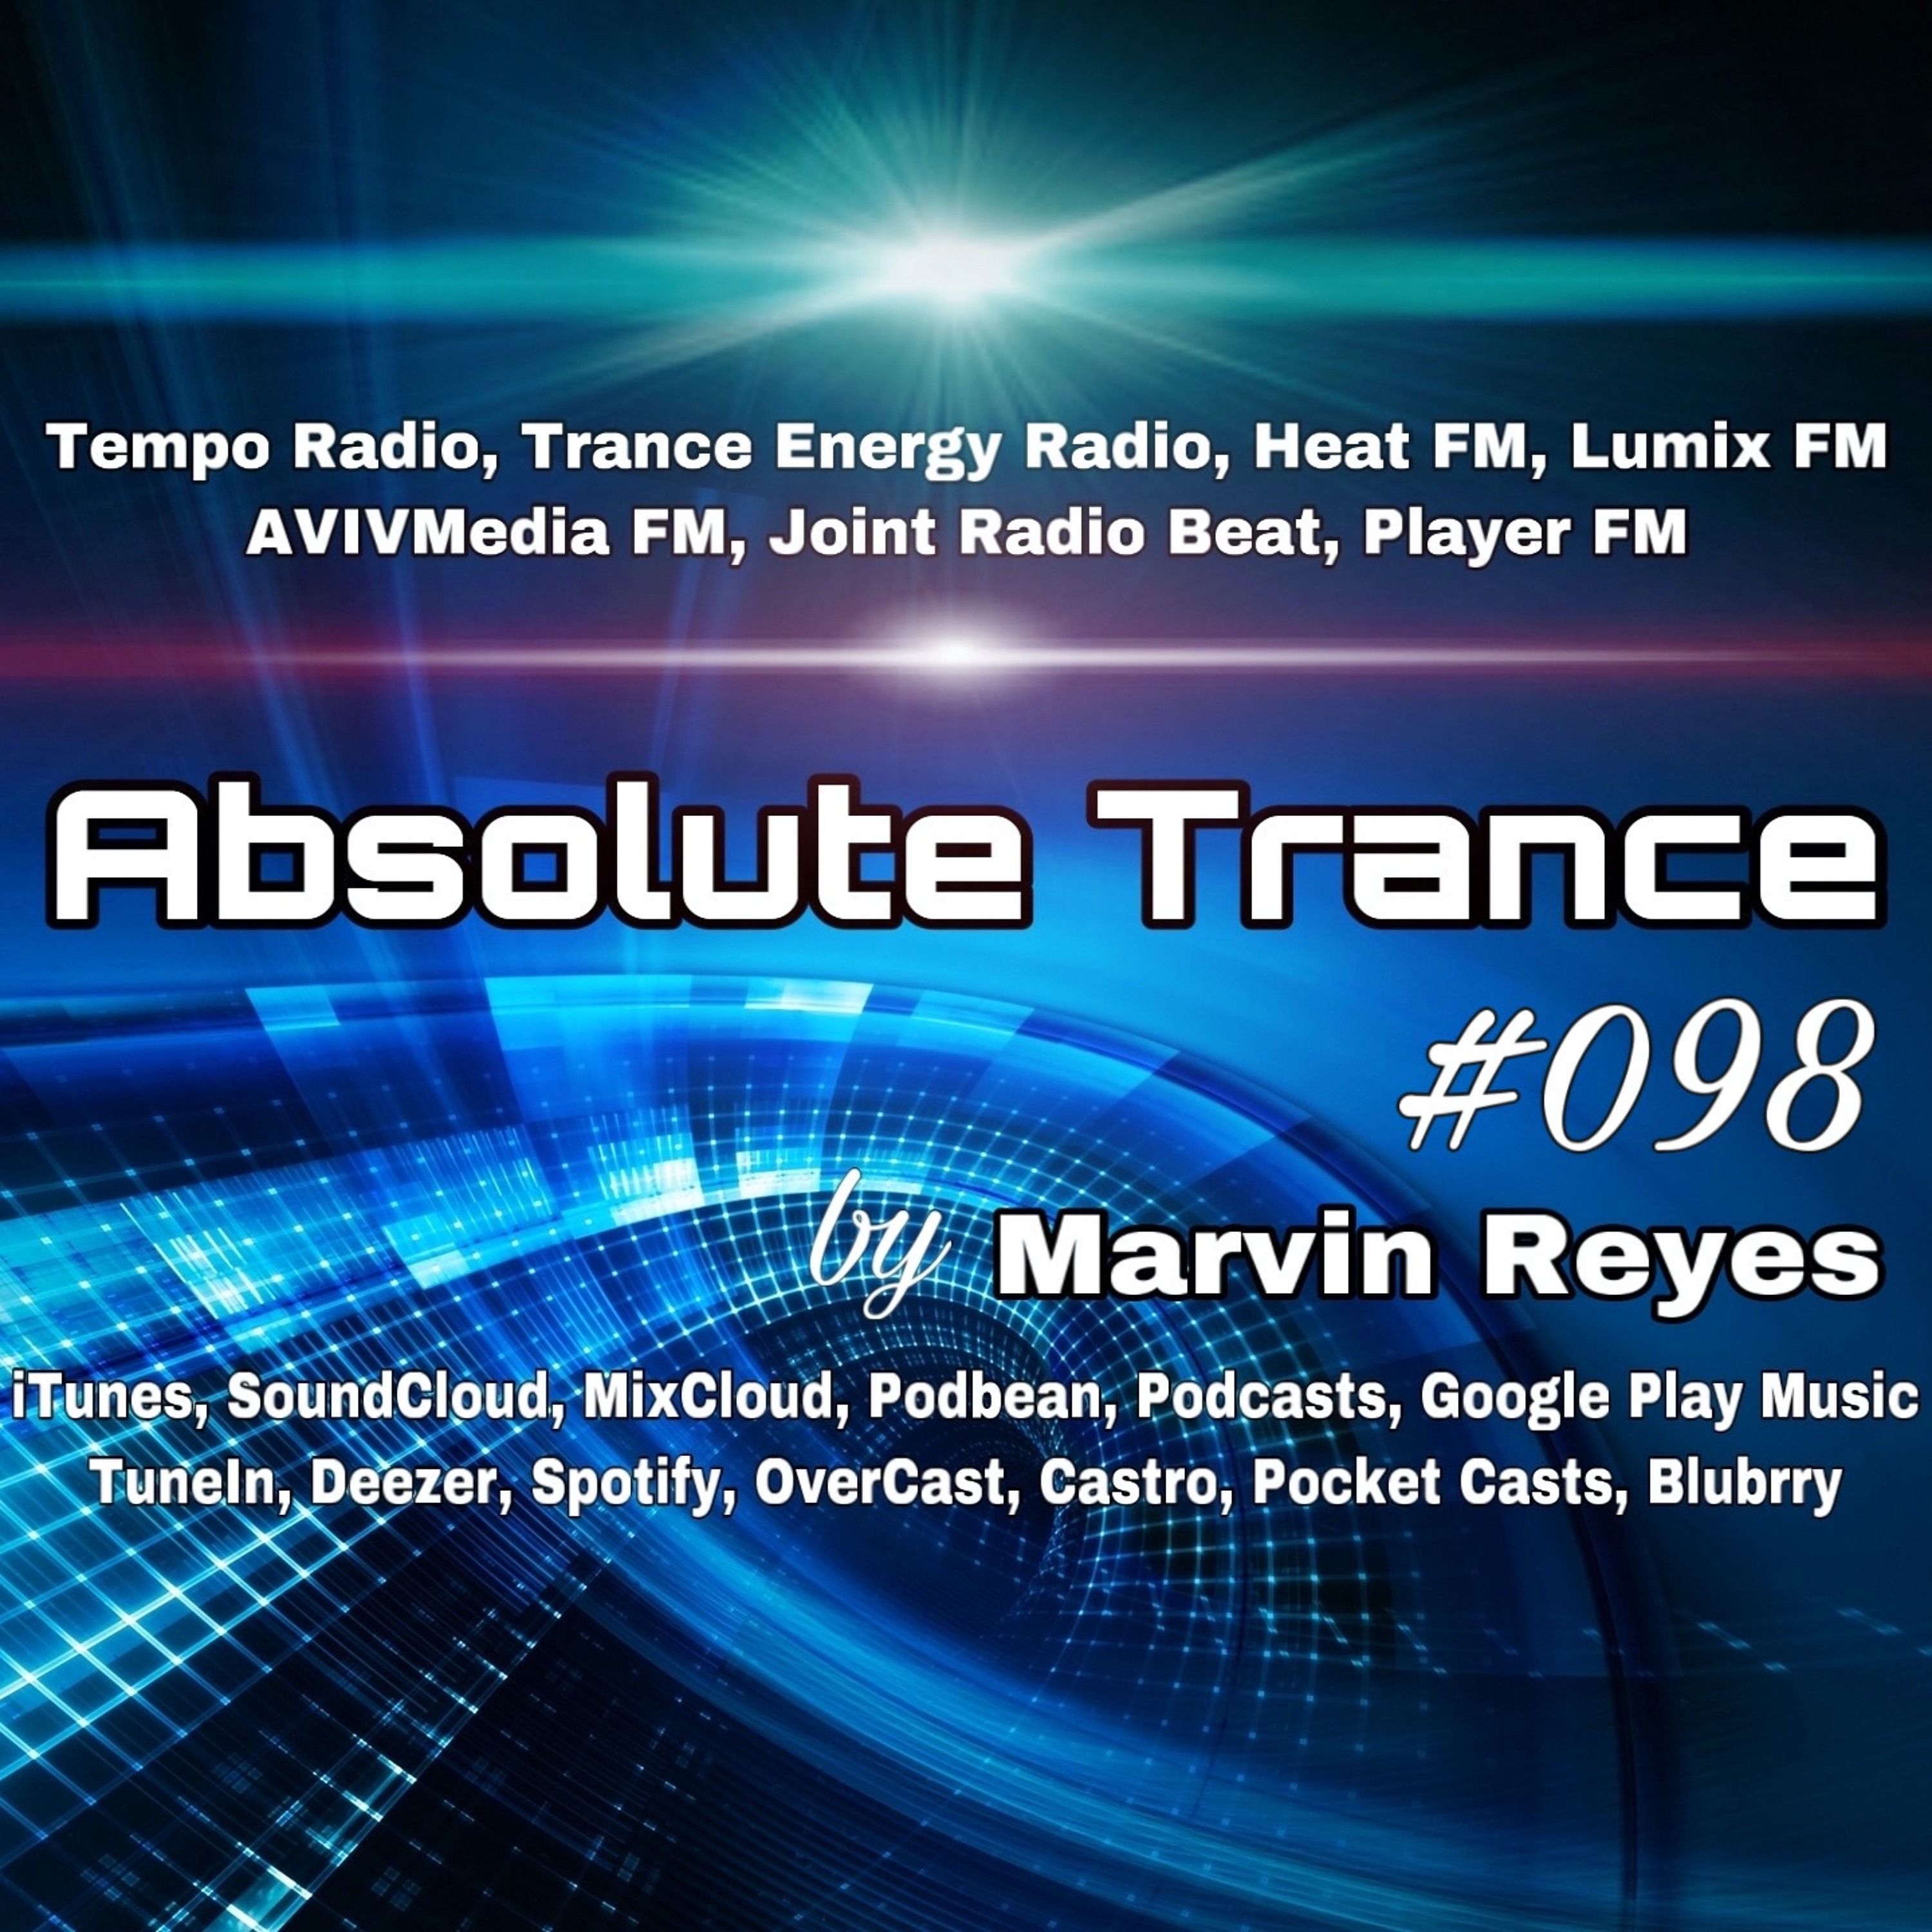 Absolute Trance #098